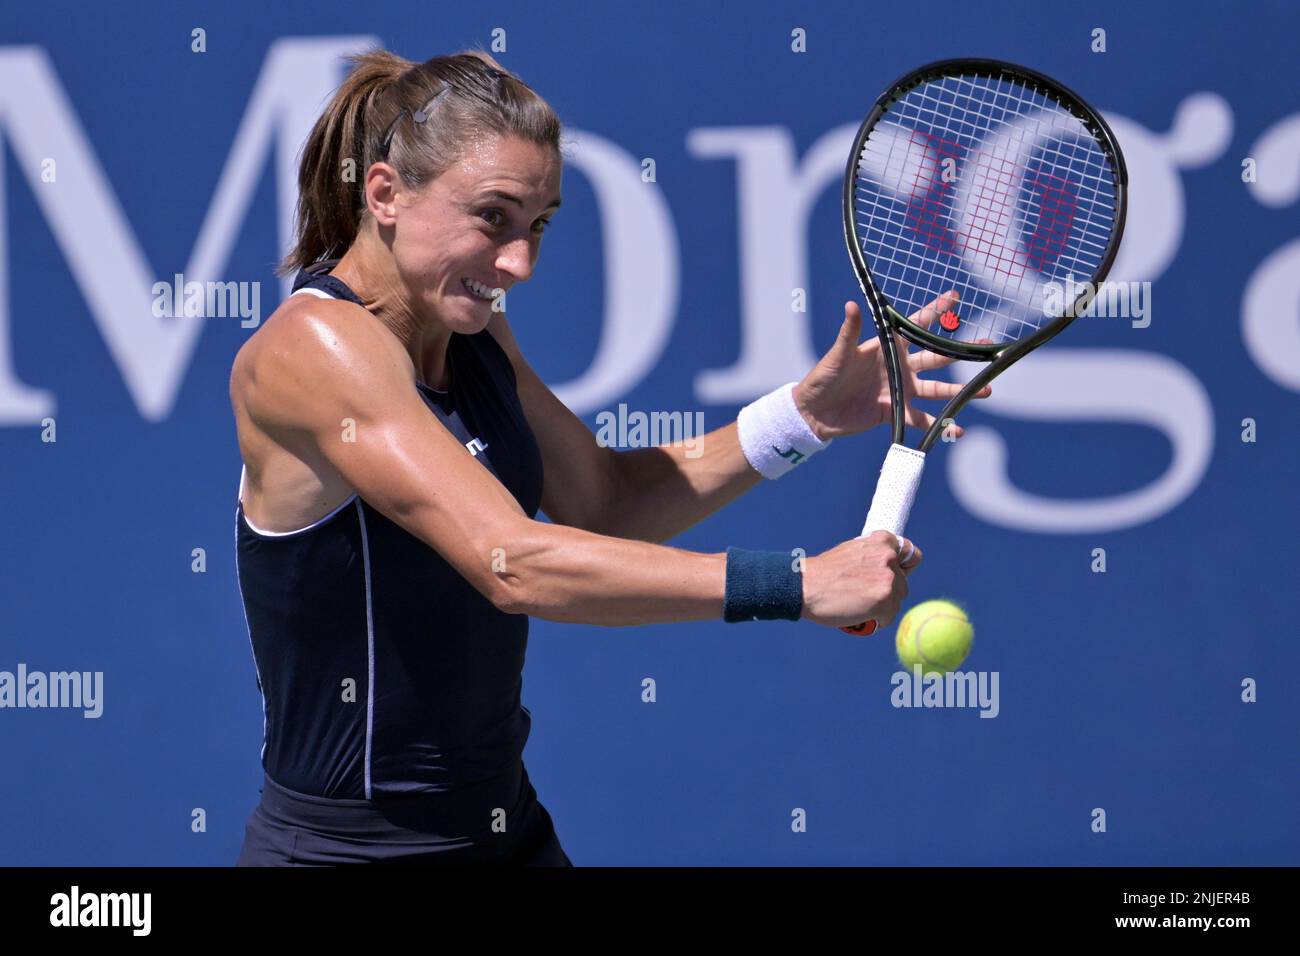 Petra Martic returns during a womens singles match at the 2022 US Open, Thursday, Sep